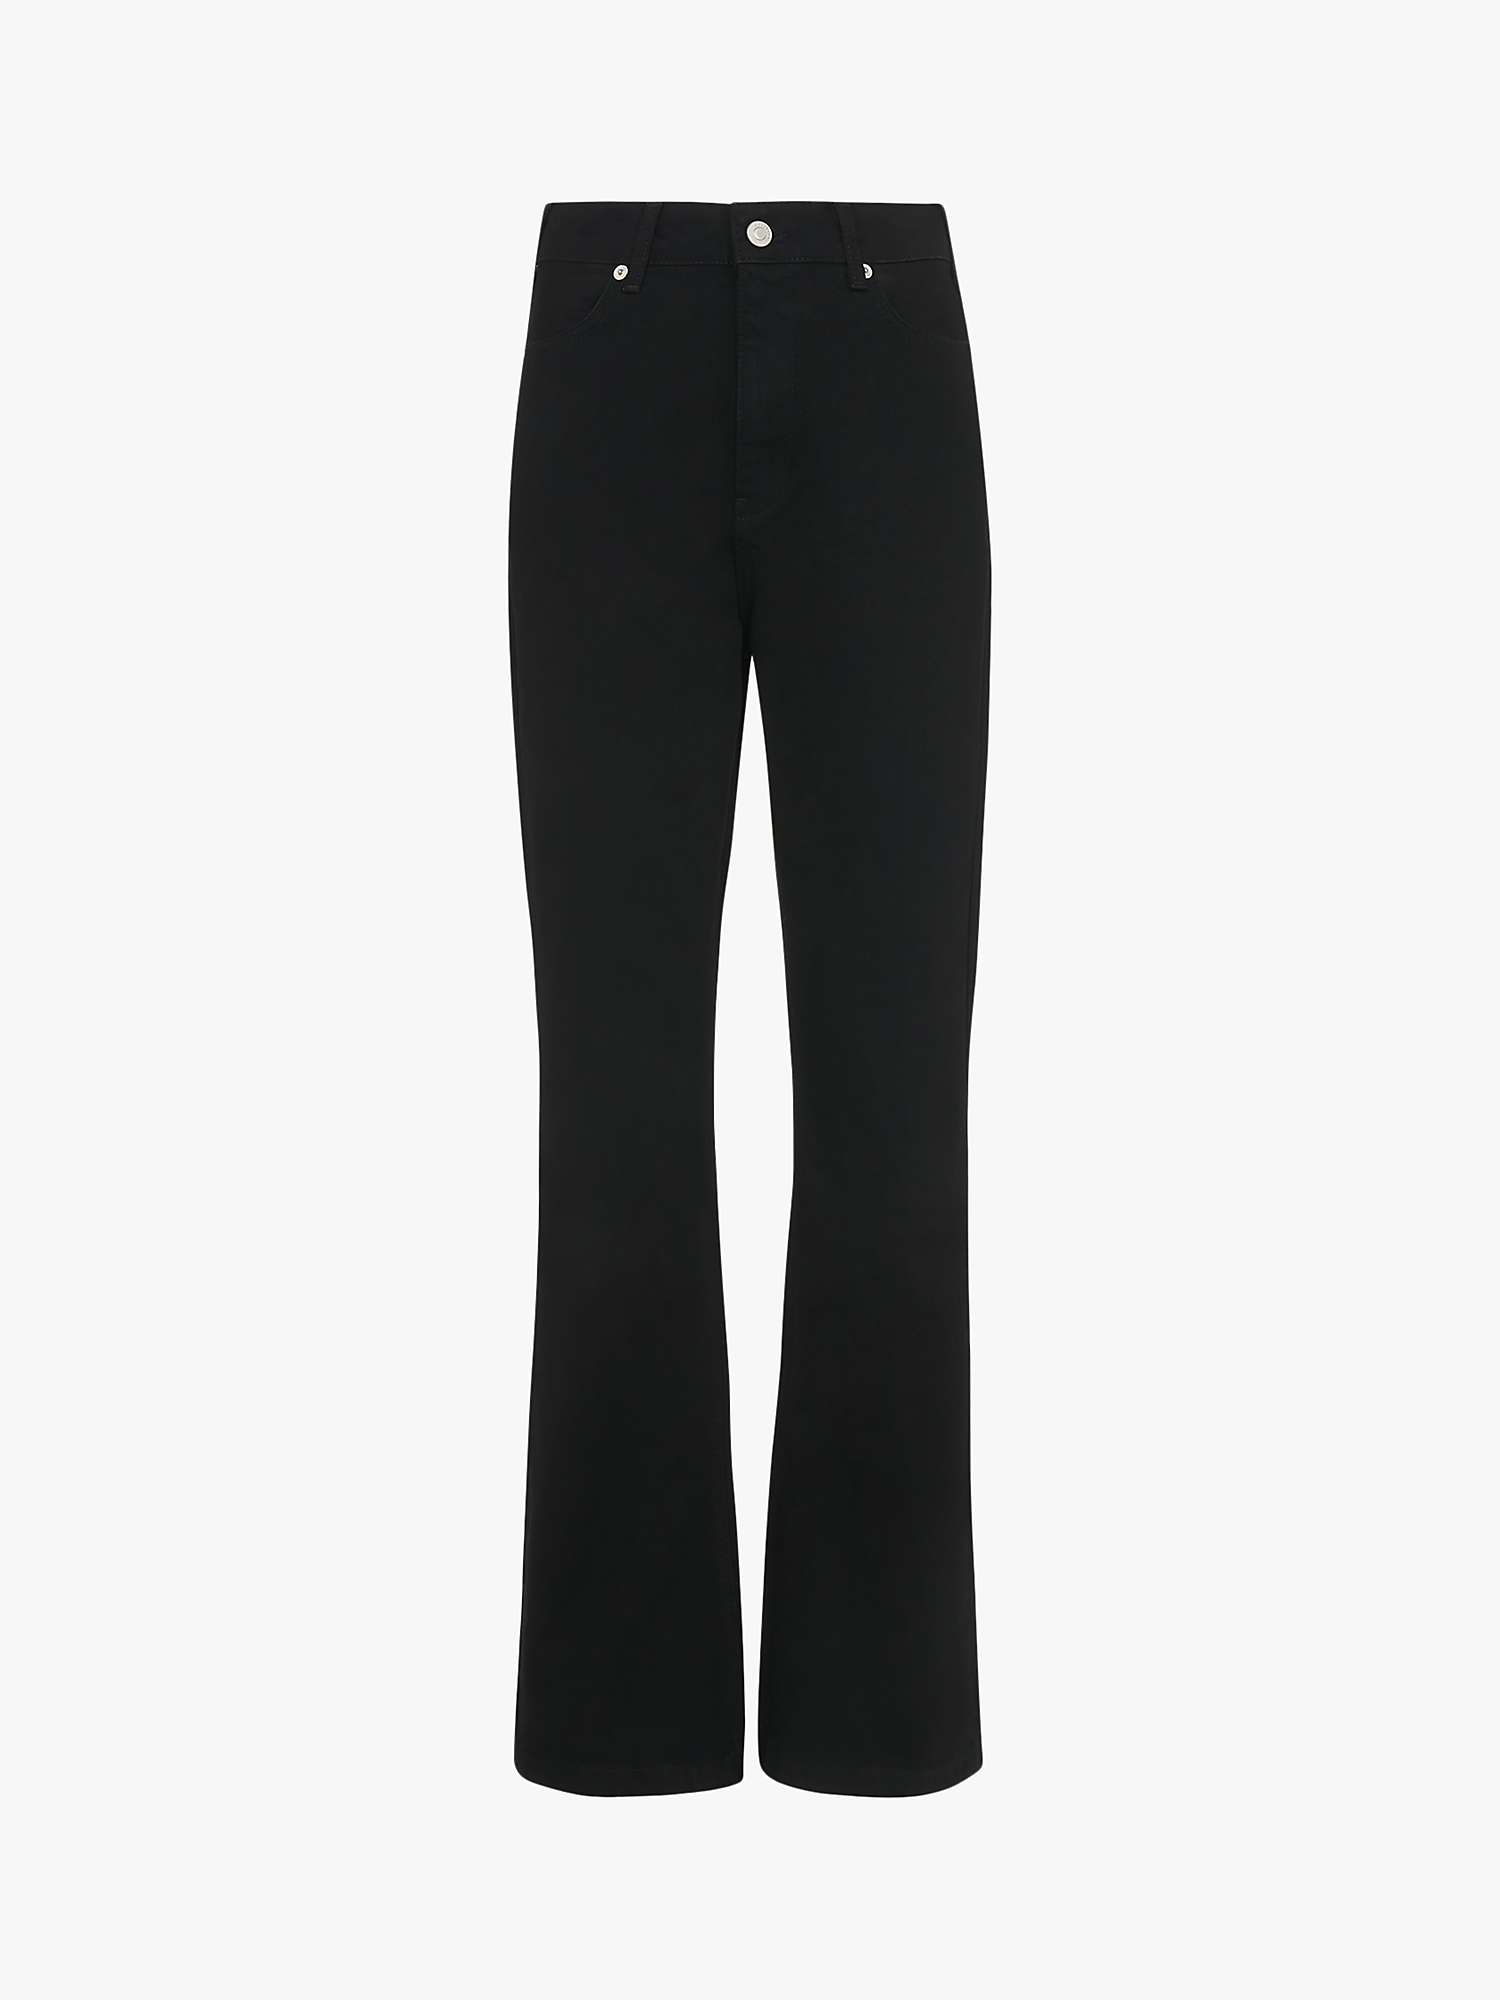 Buy Whistles Authentic Flared Jeans, Black Online at johnlewis.com